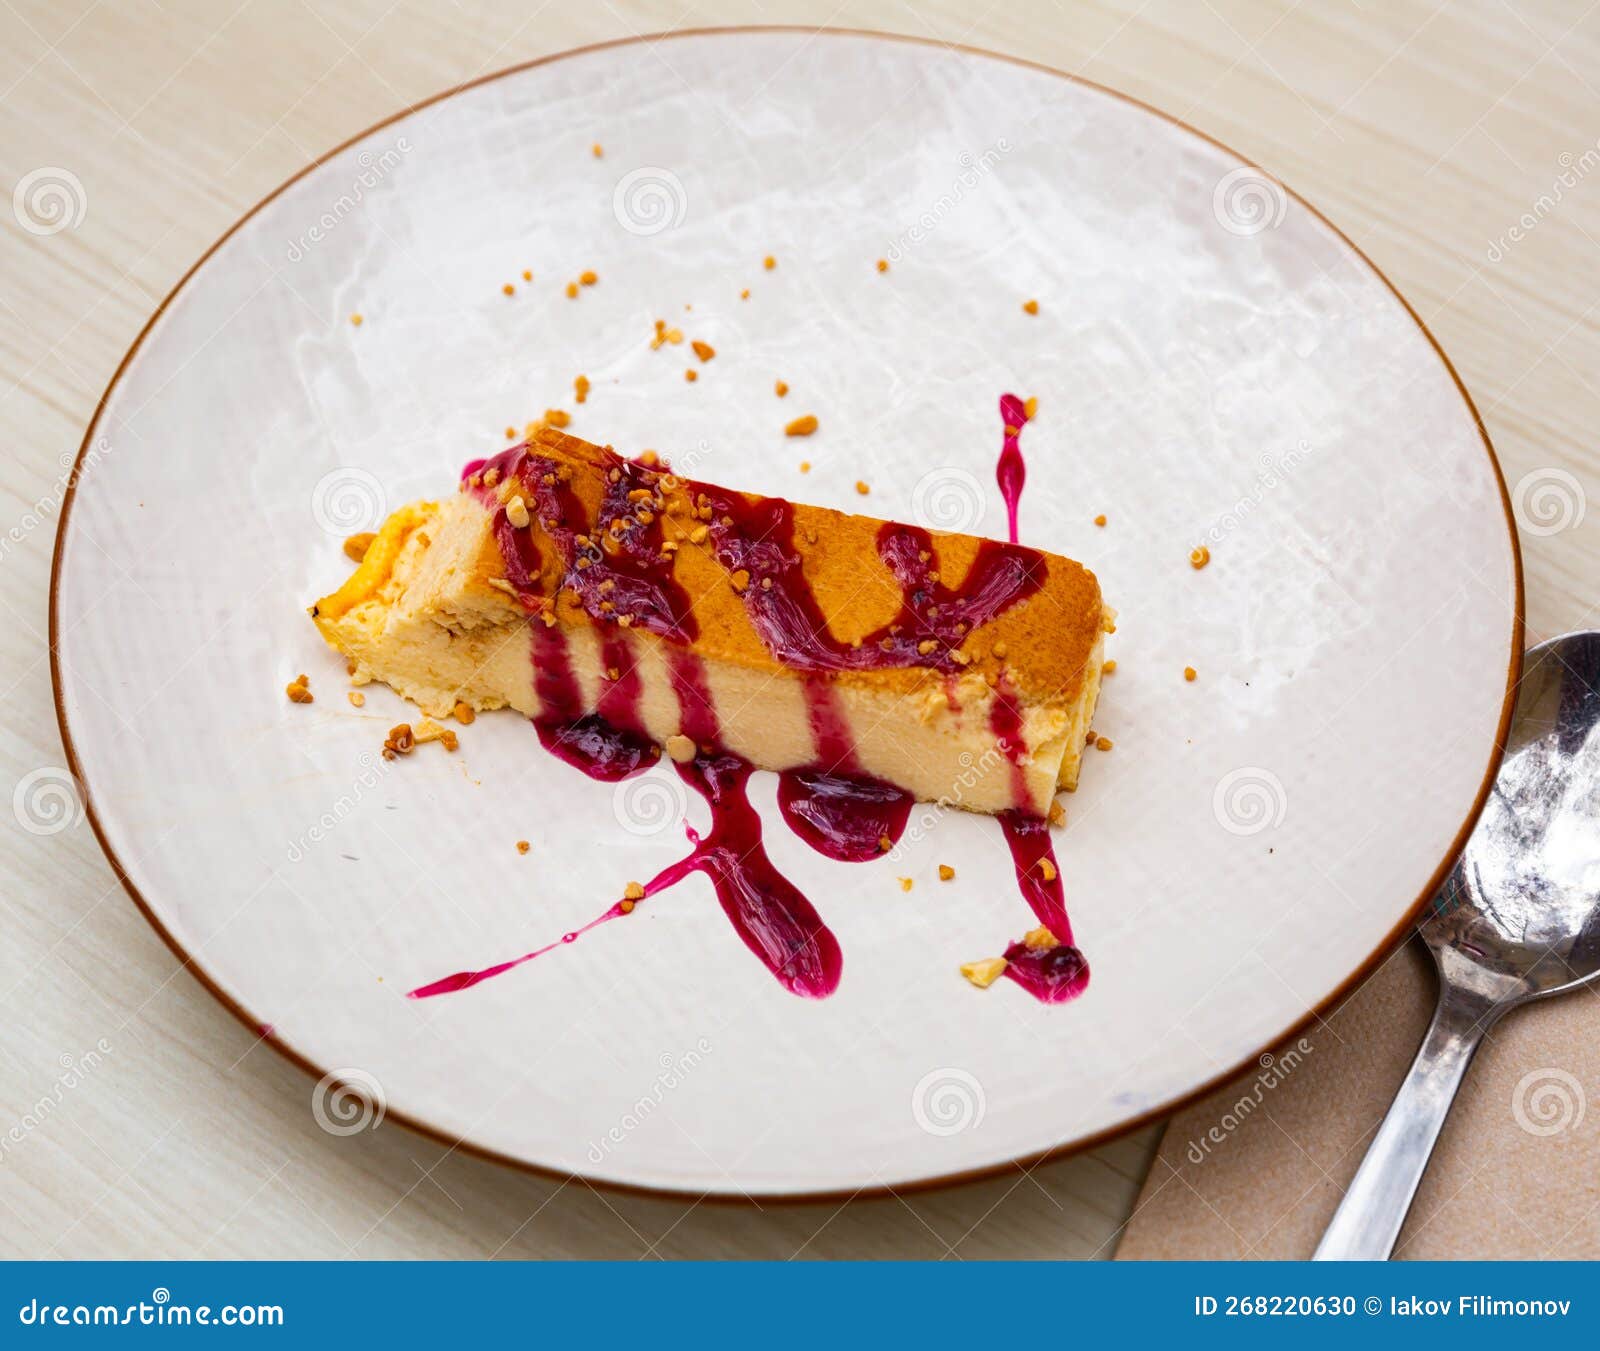 slice of delicious cake with cheese mousse with blueberry topping on plate. spanish dessert tarta de queso con arandano